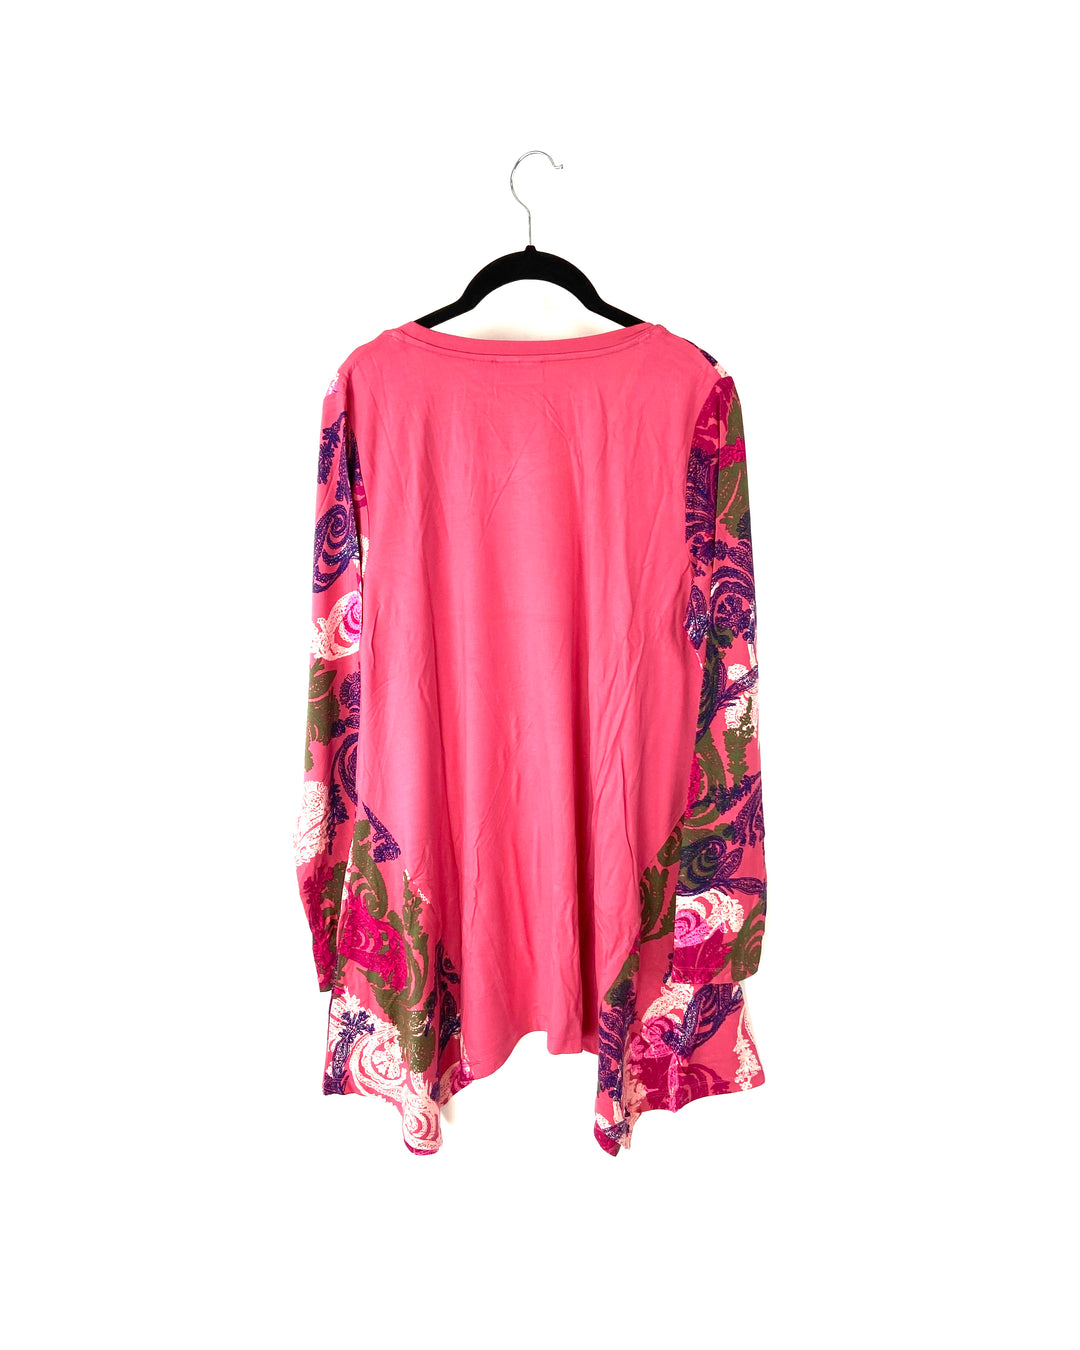 Pink Floral Long Sleeve Top - Size 6-8